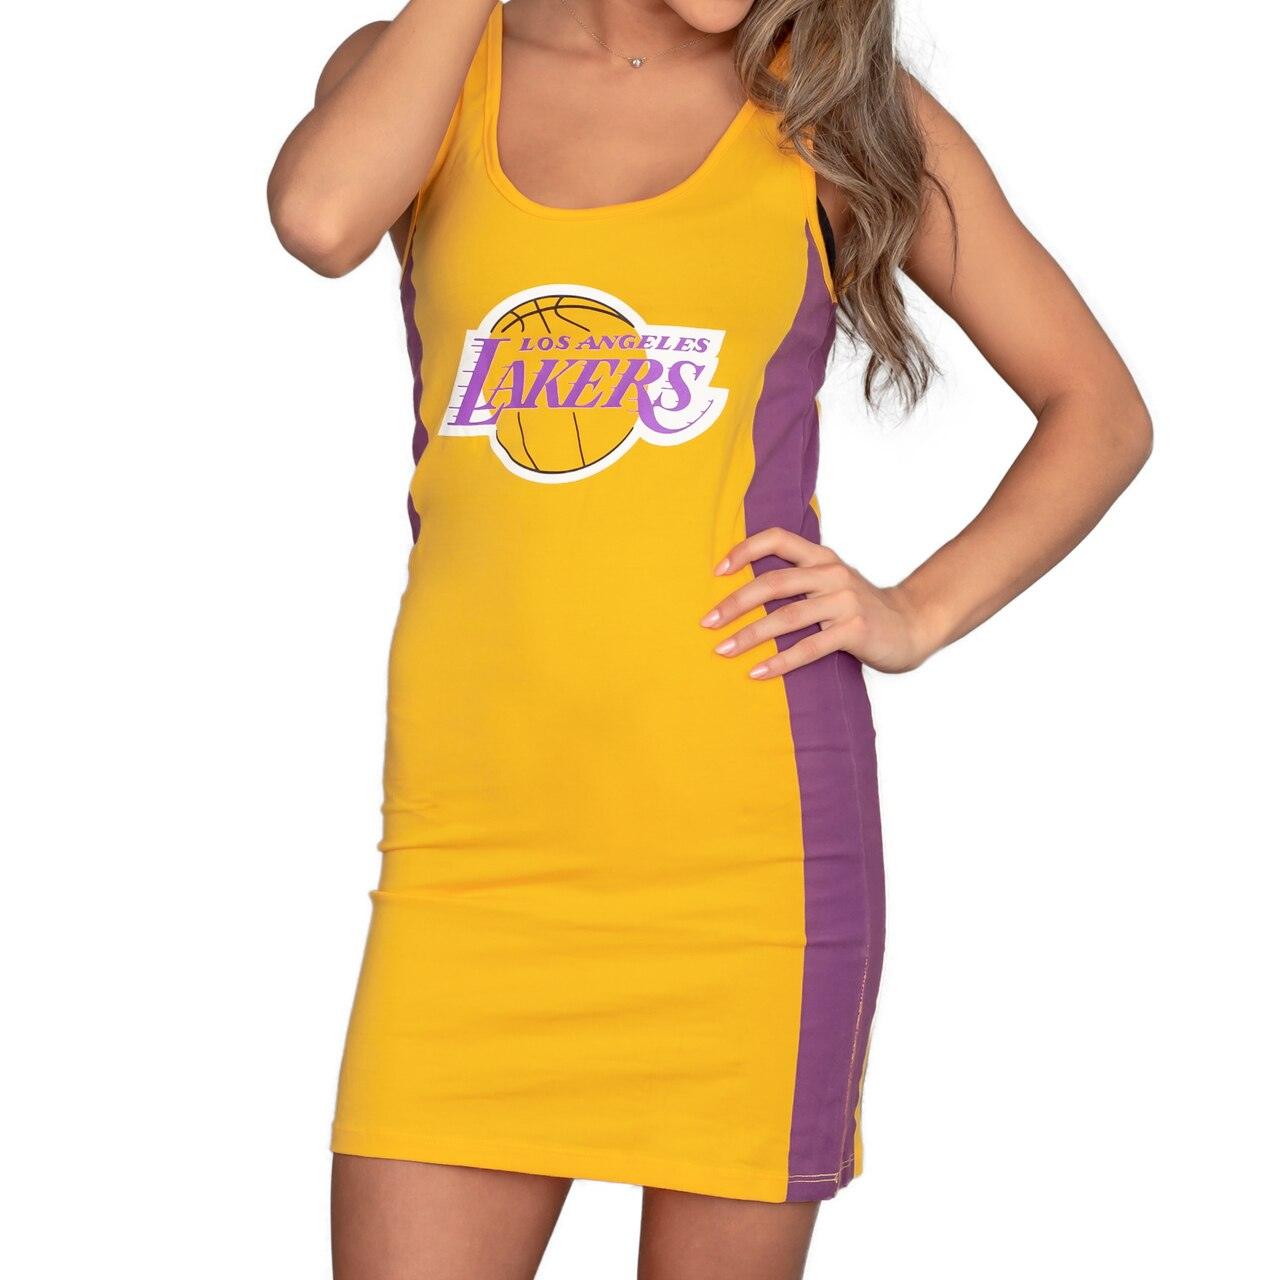 Buy Lakers Jersey Couples online